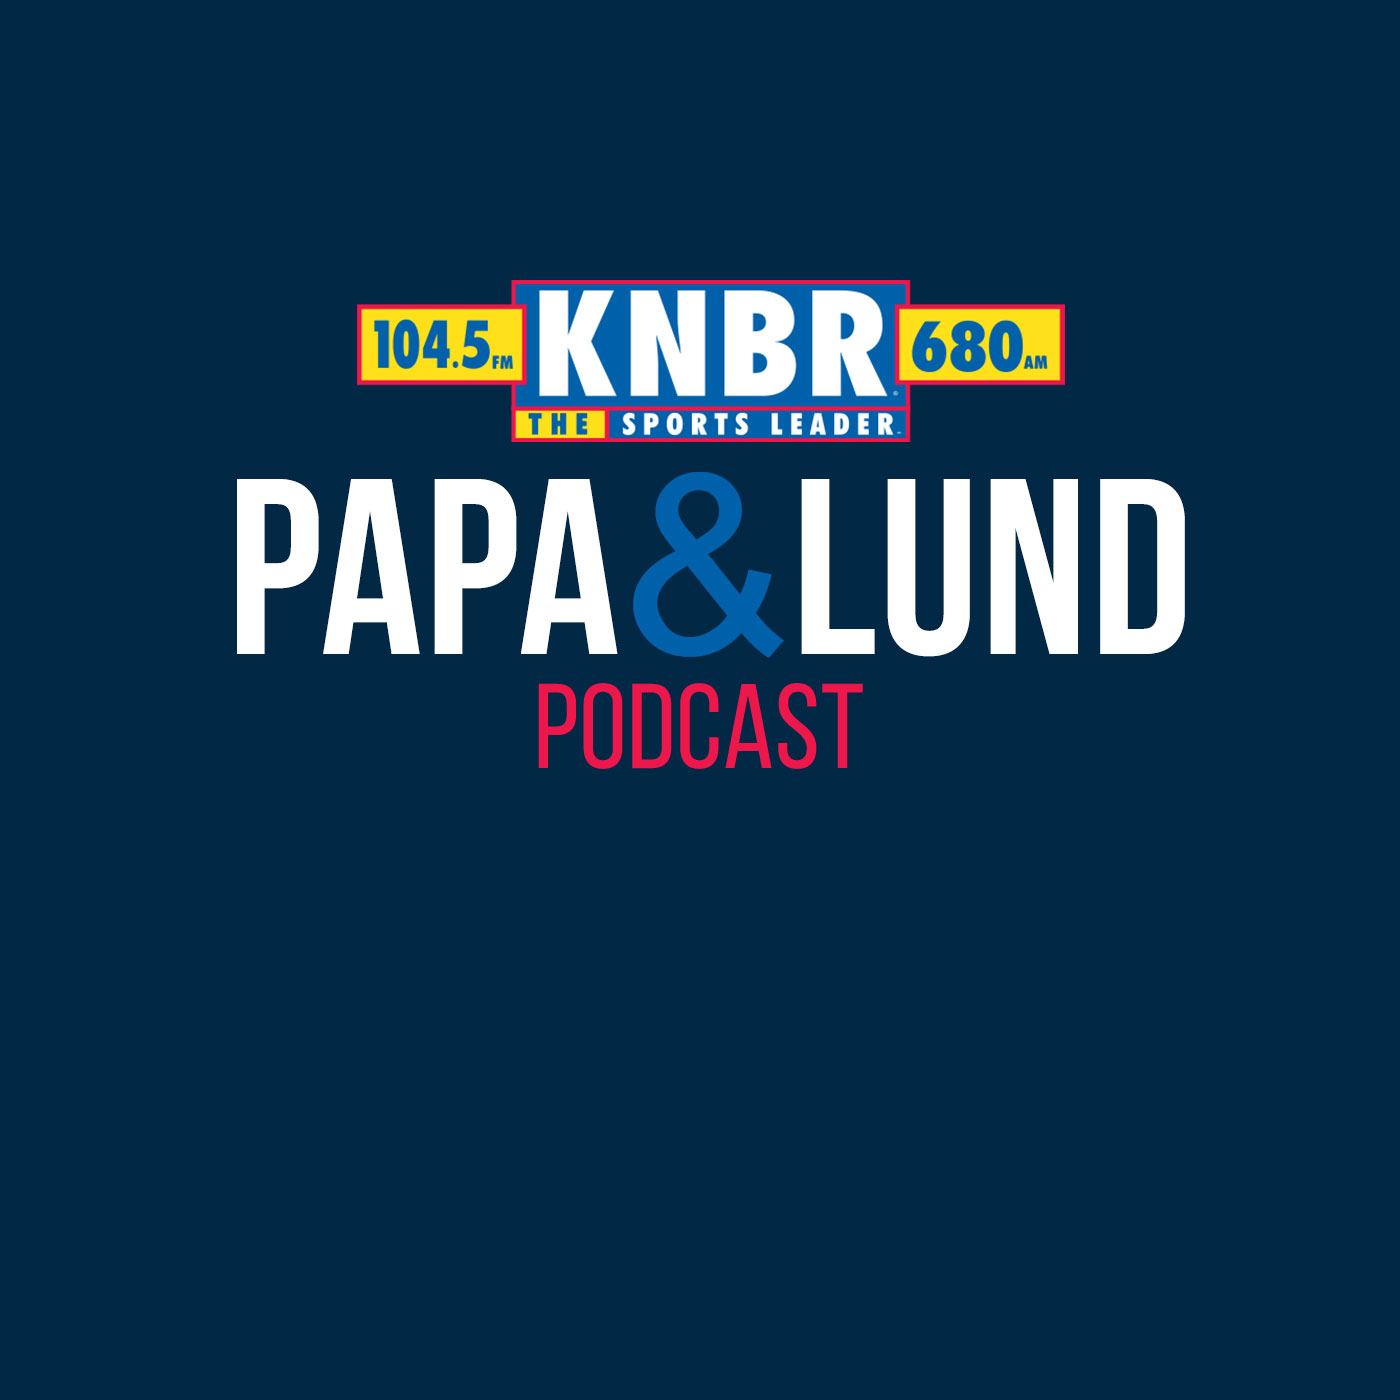 6-17 Shaun Powell joins Papa & Lund to discuss the Finals performance for Steph Curry and where it puts him with the all time greats of the NBA